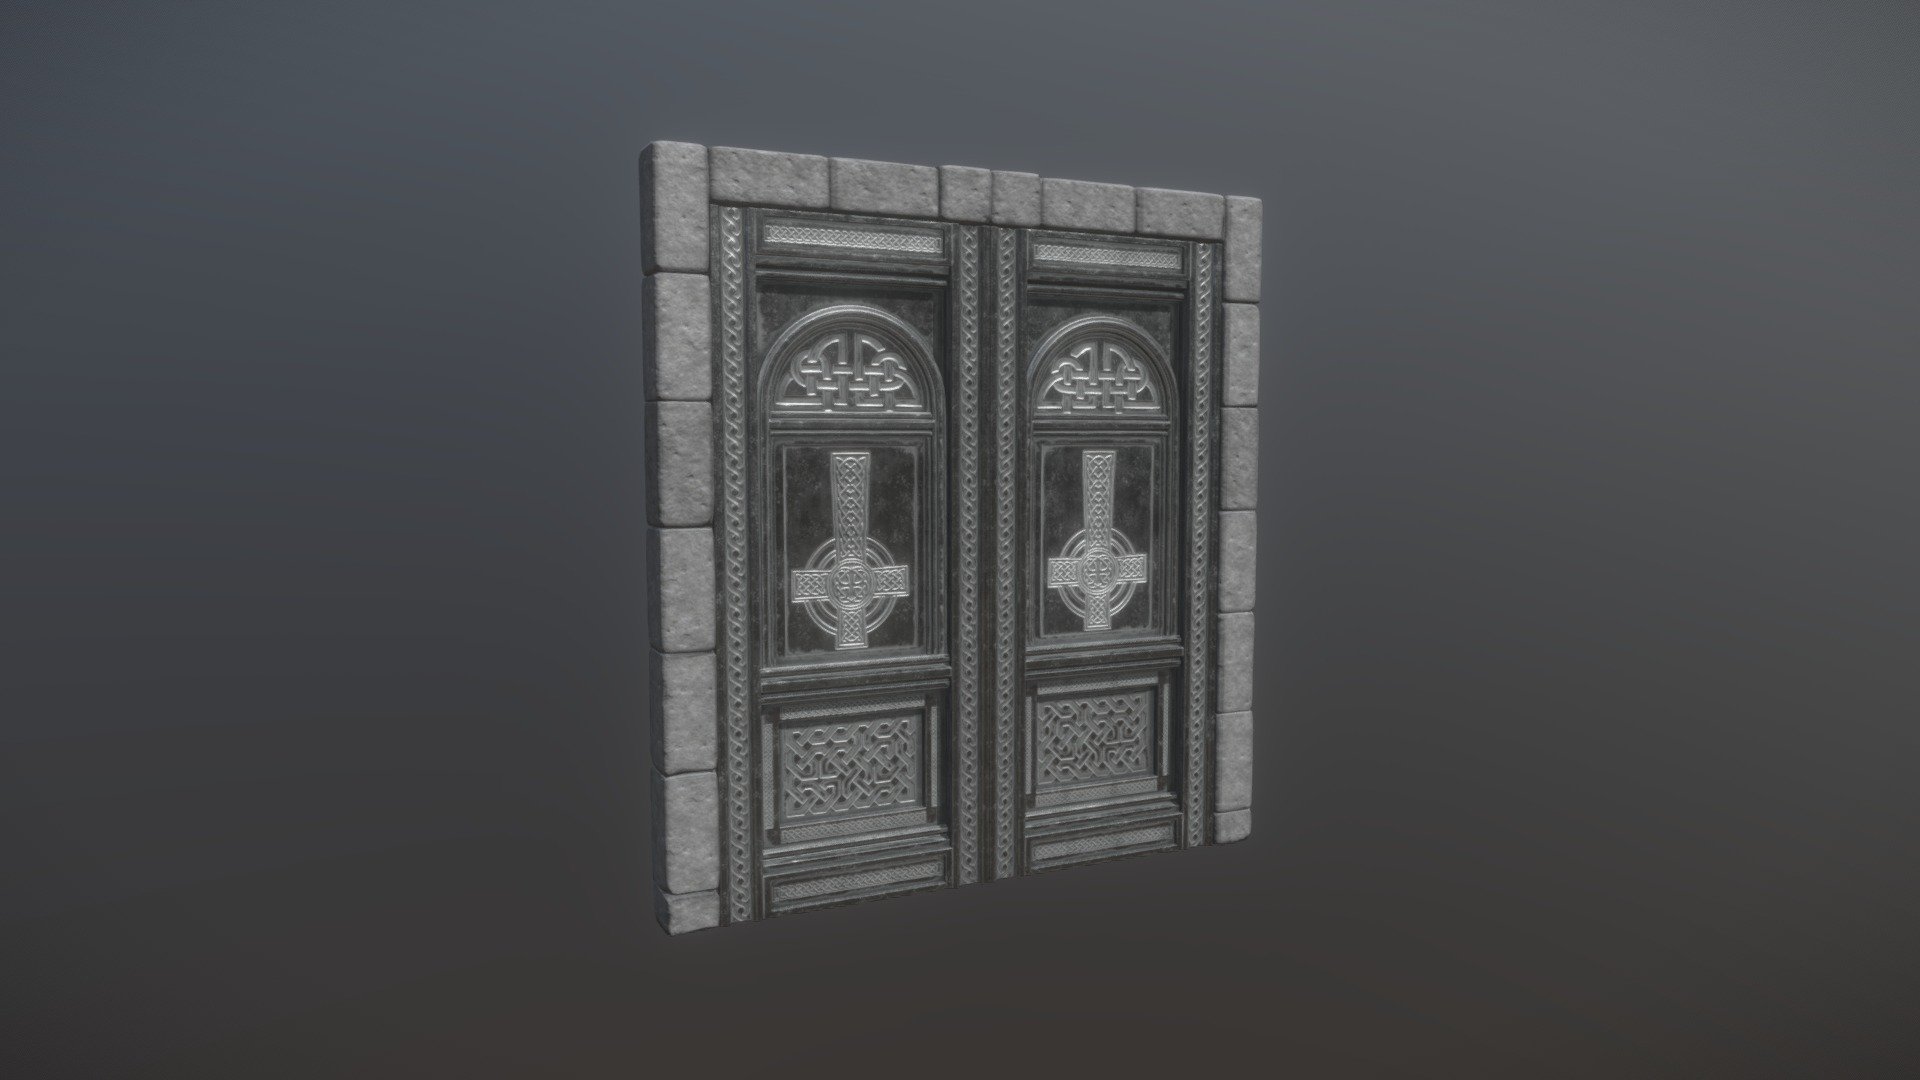 Metal Door Low Poly 3D model

Includes PBR texture set: -Base Color -Metallic -Normal- Roughness

File Formats: -Obj

Hope you like it, Be sure to check out my other 3D models if you get a chance - Metal Door - Buy Royalty Free 3D model by captainapoc 3d model